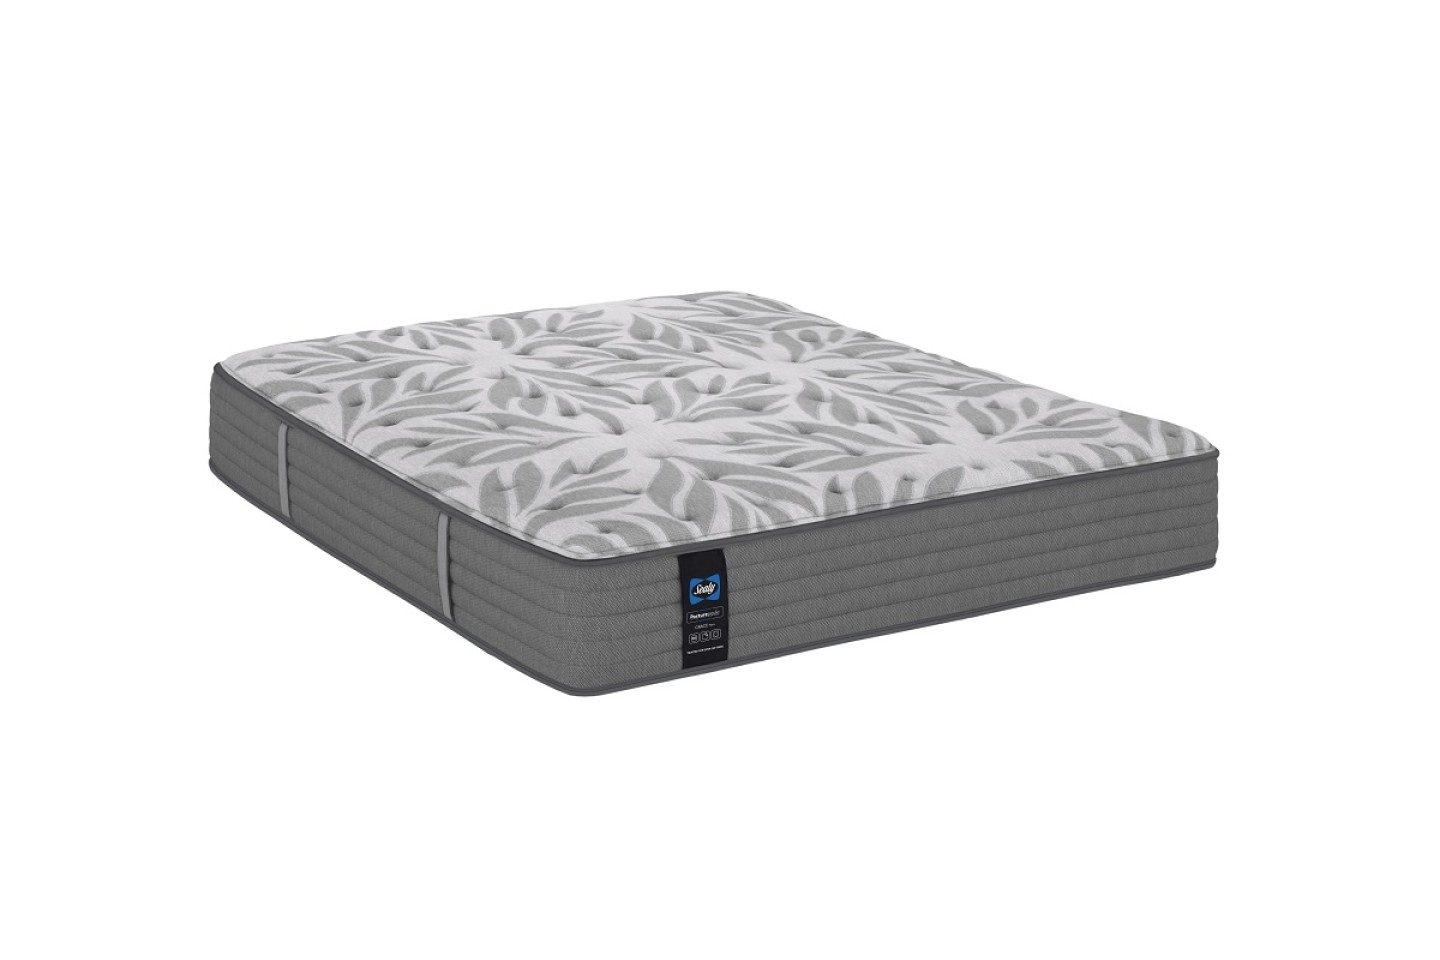 THE GRACE MATTRESS by Sealy